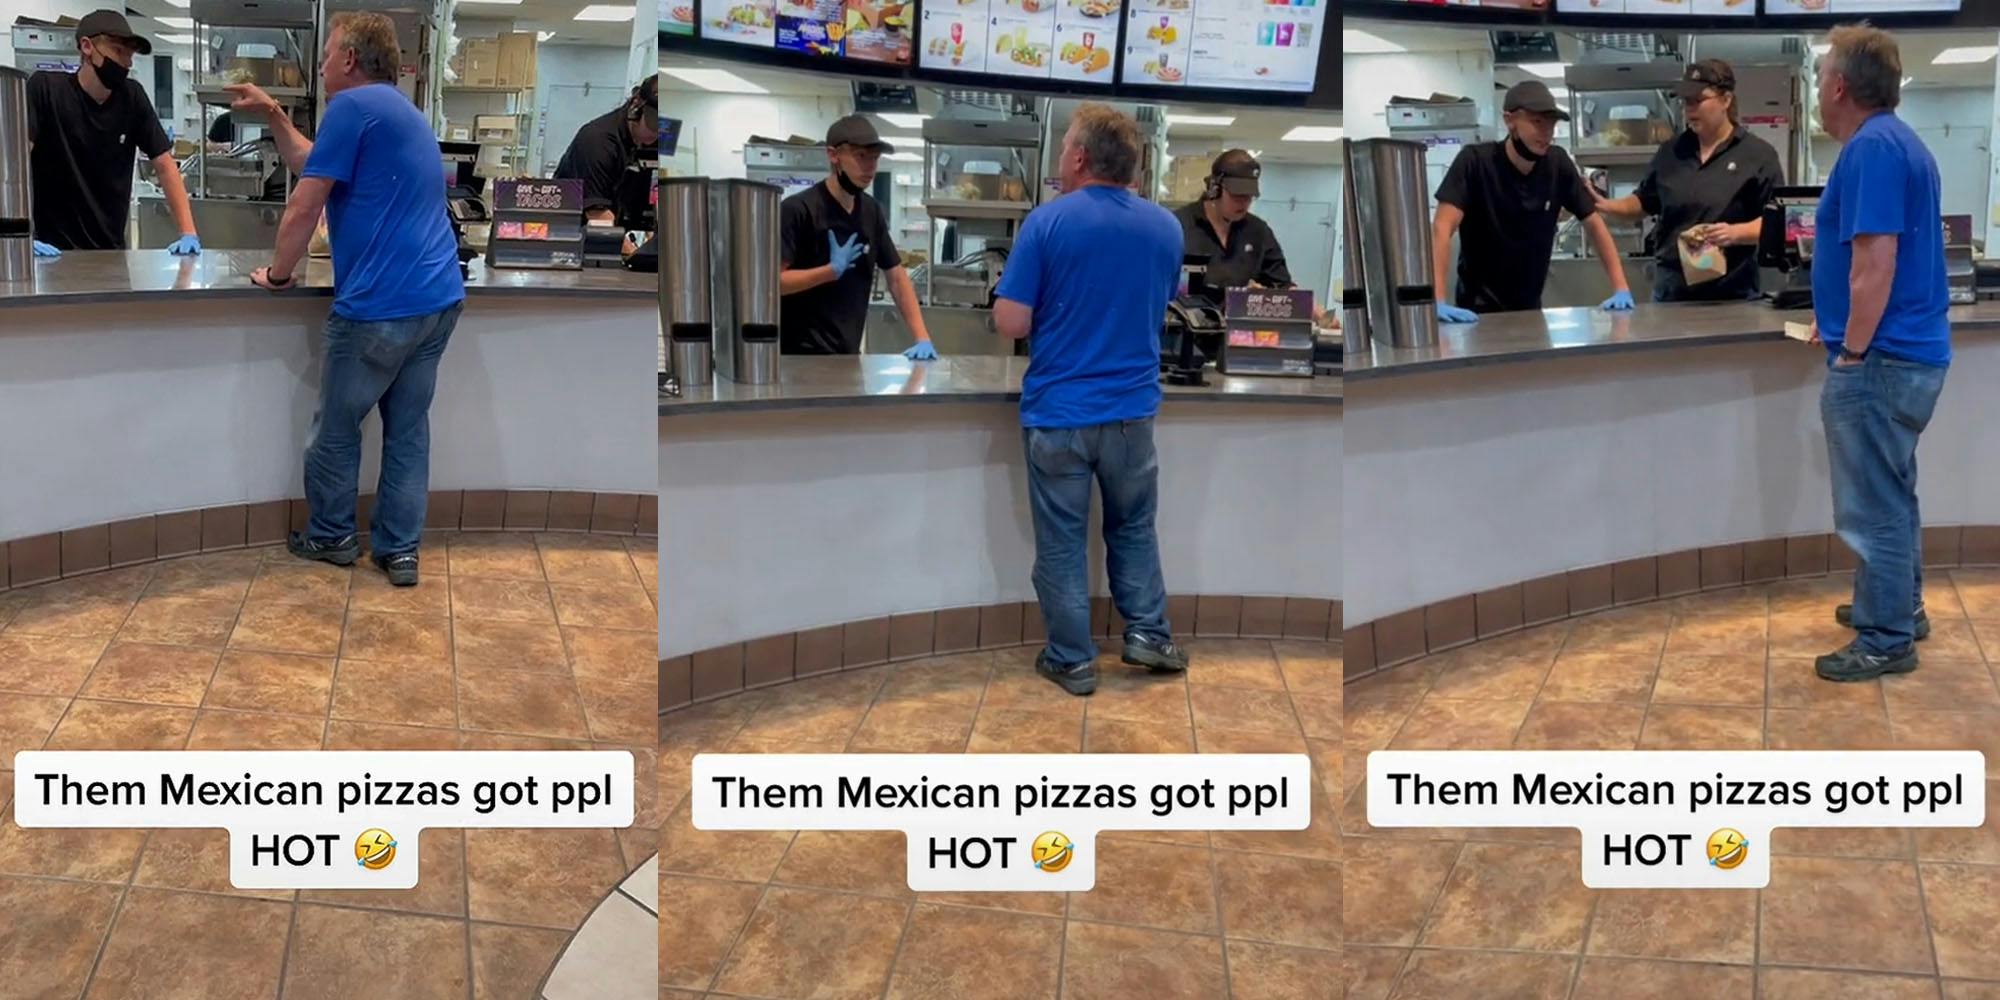 man at Taco Bell counter pointing at worker caption "Them Mexican pizzas got ppl HOT" (l) Man at Taco Bell counter employee hand on chest caption "Them Mexican pizzas got ppl HOT" (c) man at Taco Bell counter worker mad hands on table other worker holding his arm caption "Them Mexican pizzas got ppl HOT" (r)